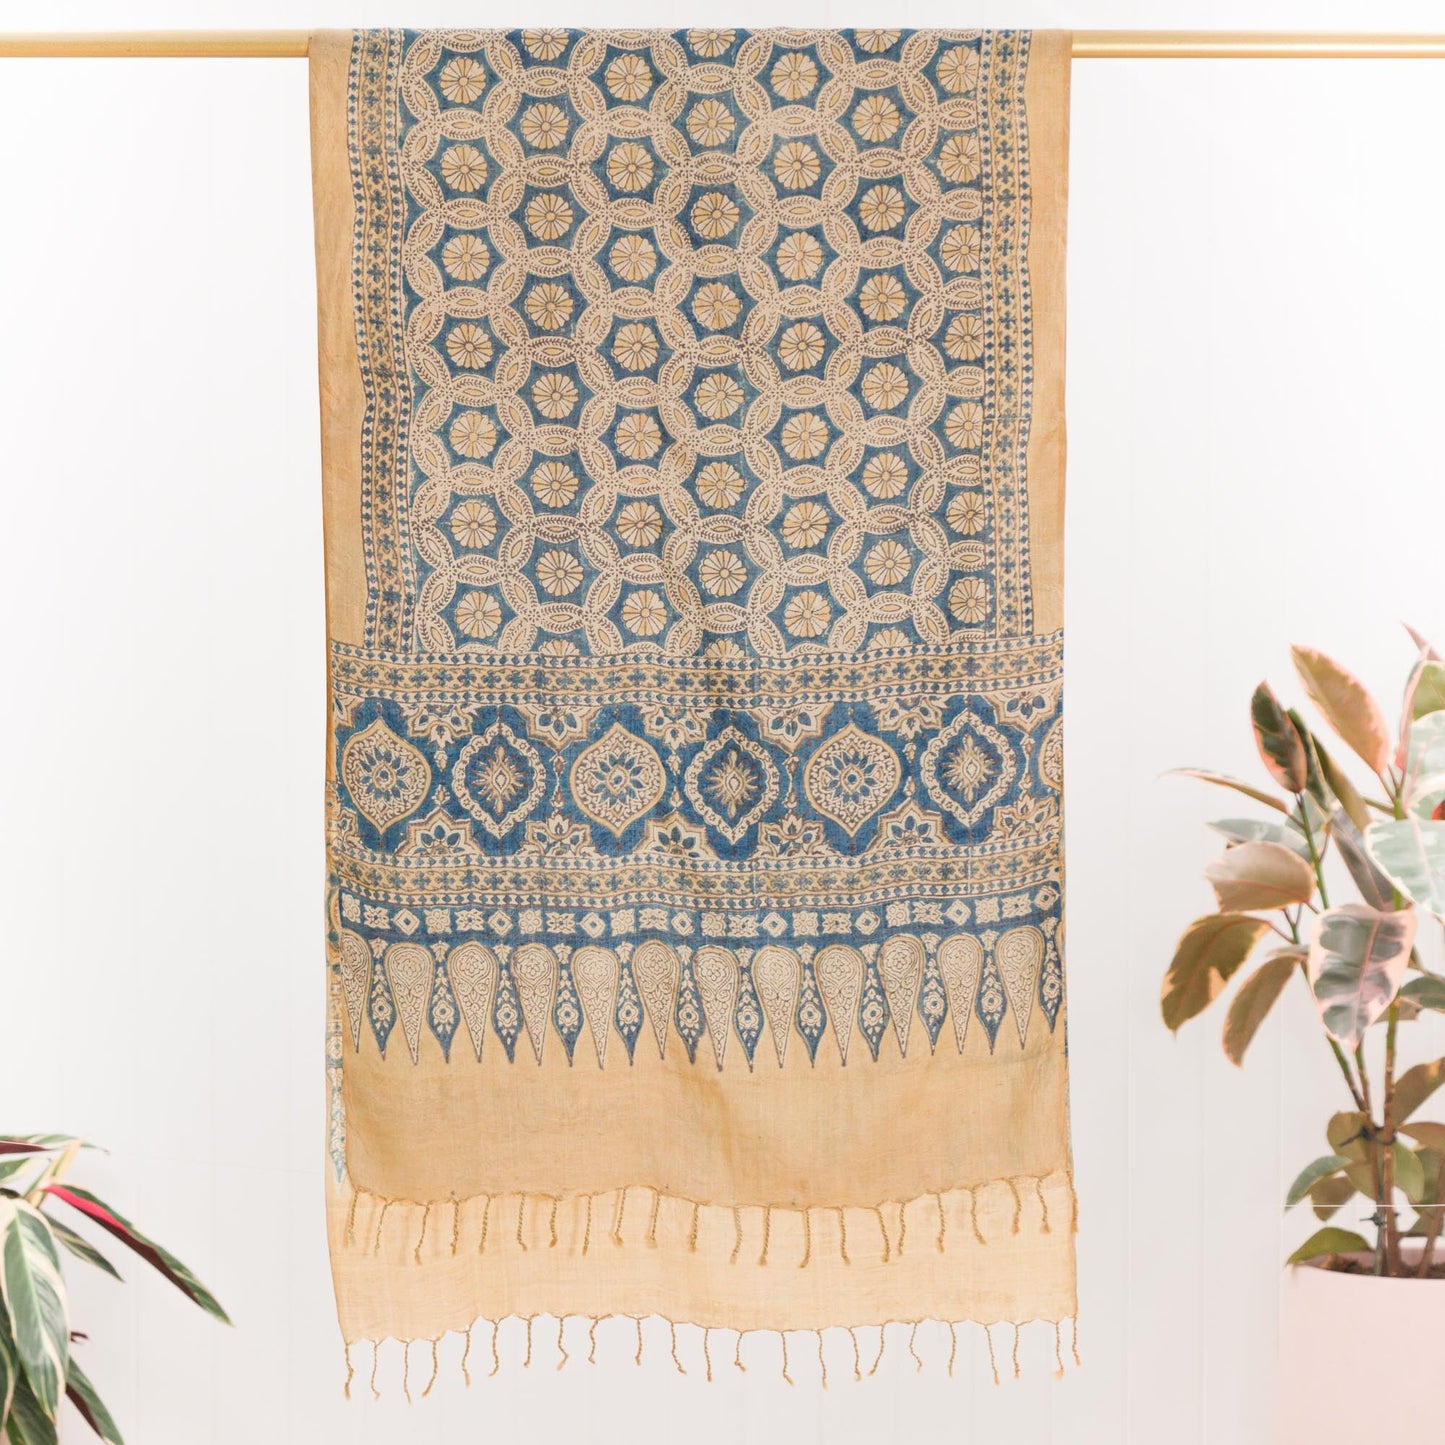 Dhavdi Flower Wild Silk Natural Dye Scarf Gifts, Scarves -xo